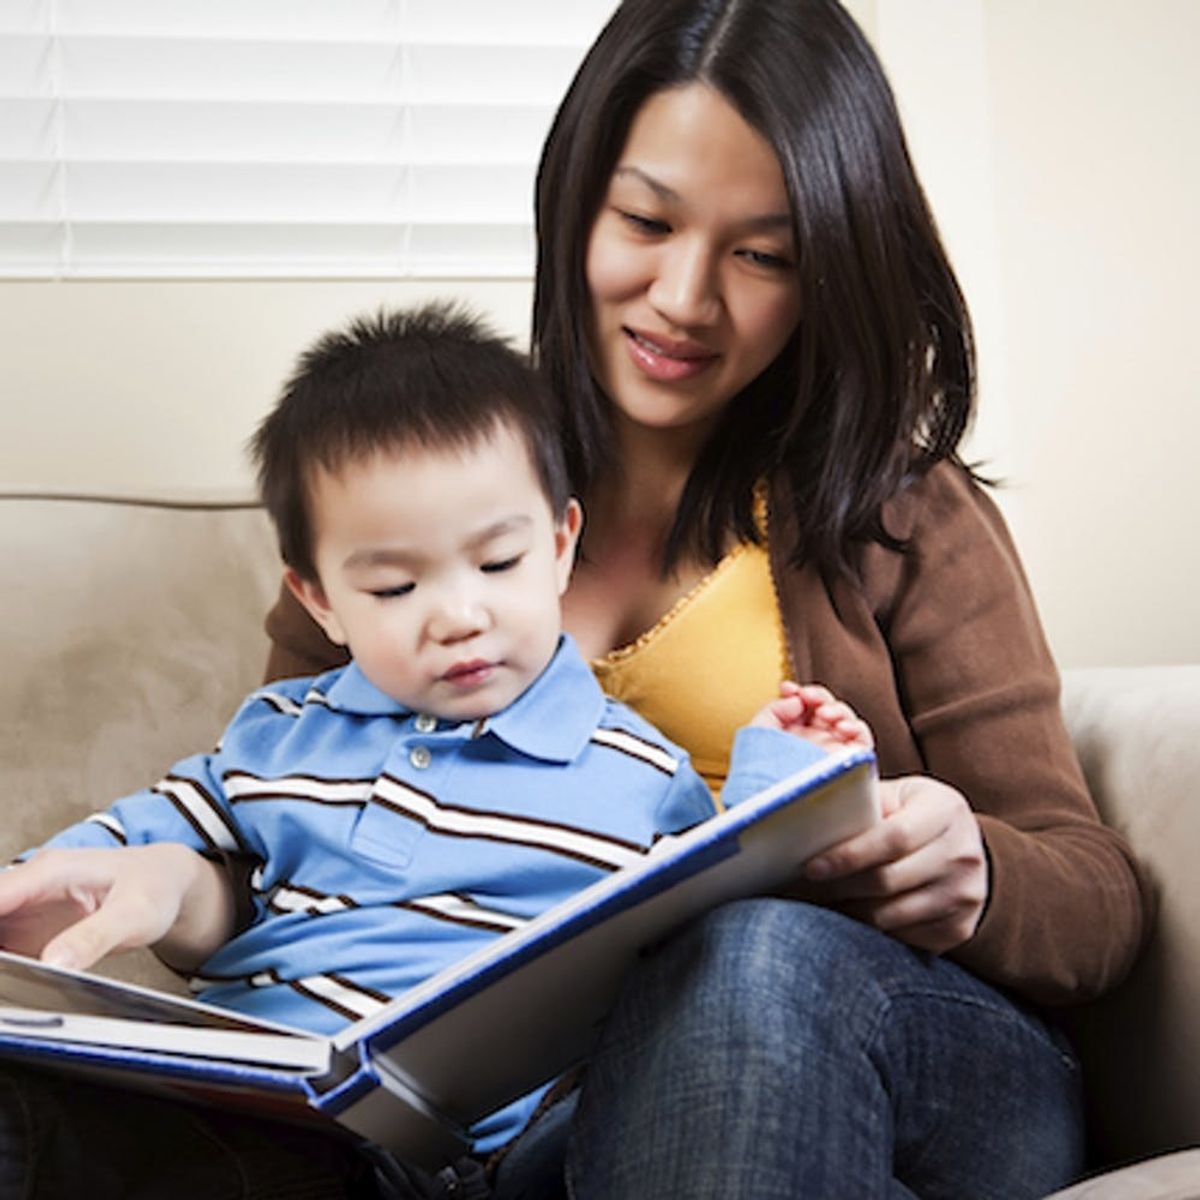 Studies Show Kids Understand Bedtime Stories Better Than You Think